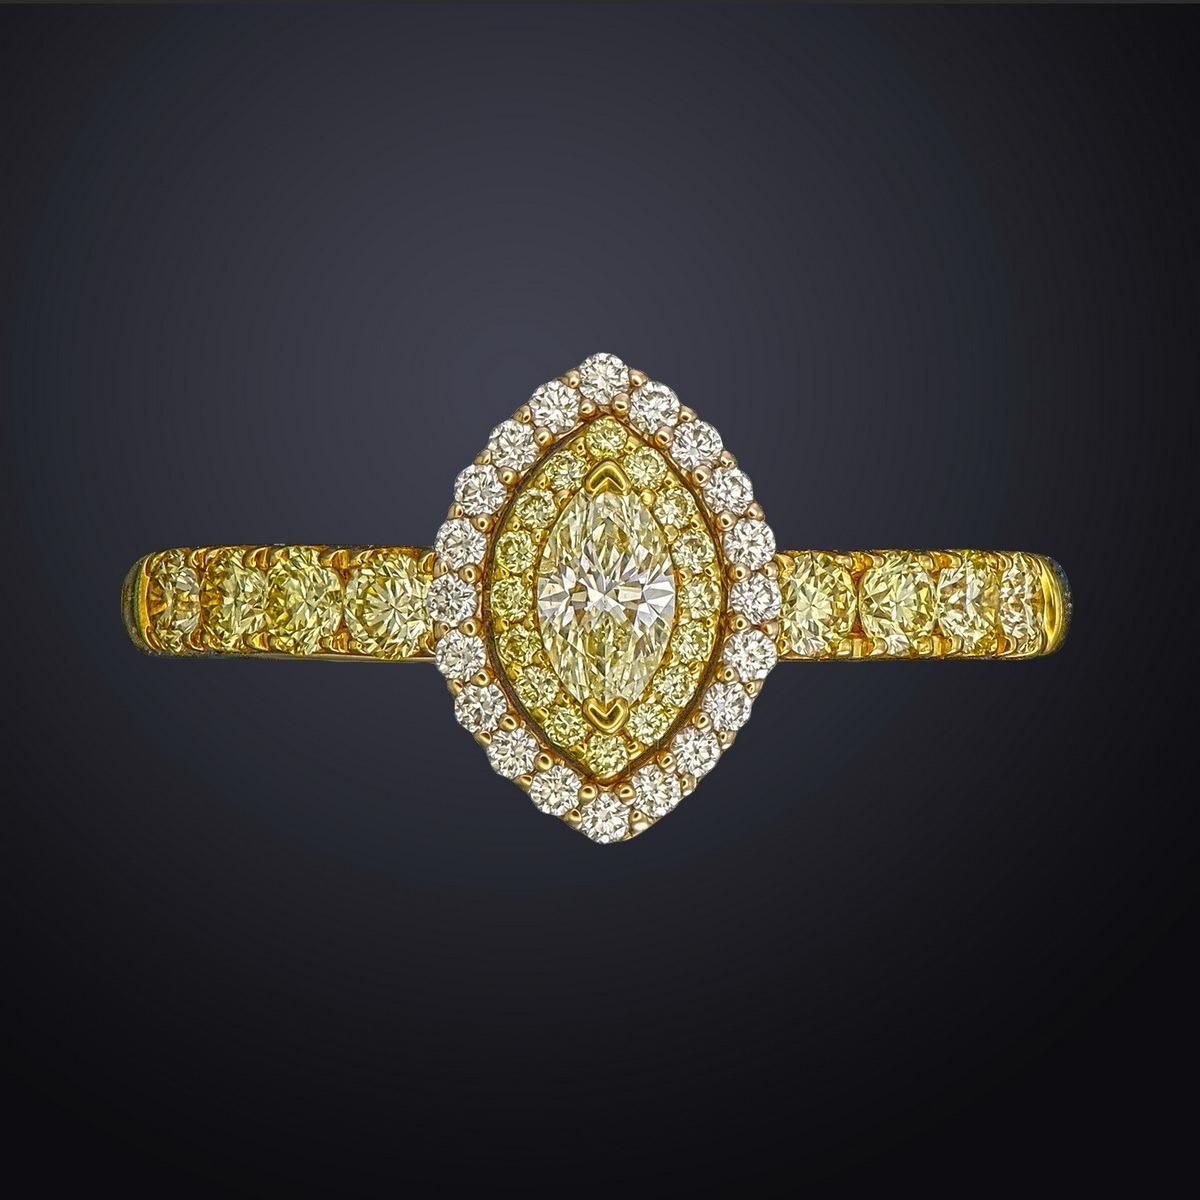 **100% NATURAL FANCY COLOUR DIAMOND JEWELRY**

✪ Jewelry Details ✪

MARQUISE DIAMOND FLY VS - 1/0.18 CT

ROUND DIAMOND FLY VS - 0.43 CT

ROUND DIAMOND G+ VS -  0.11 CT

➛ Metal Type: 18k Gold - 3.392 GMS

➛ Jewelry Type: Fashion ring, Bridal